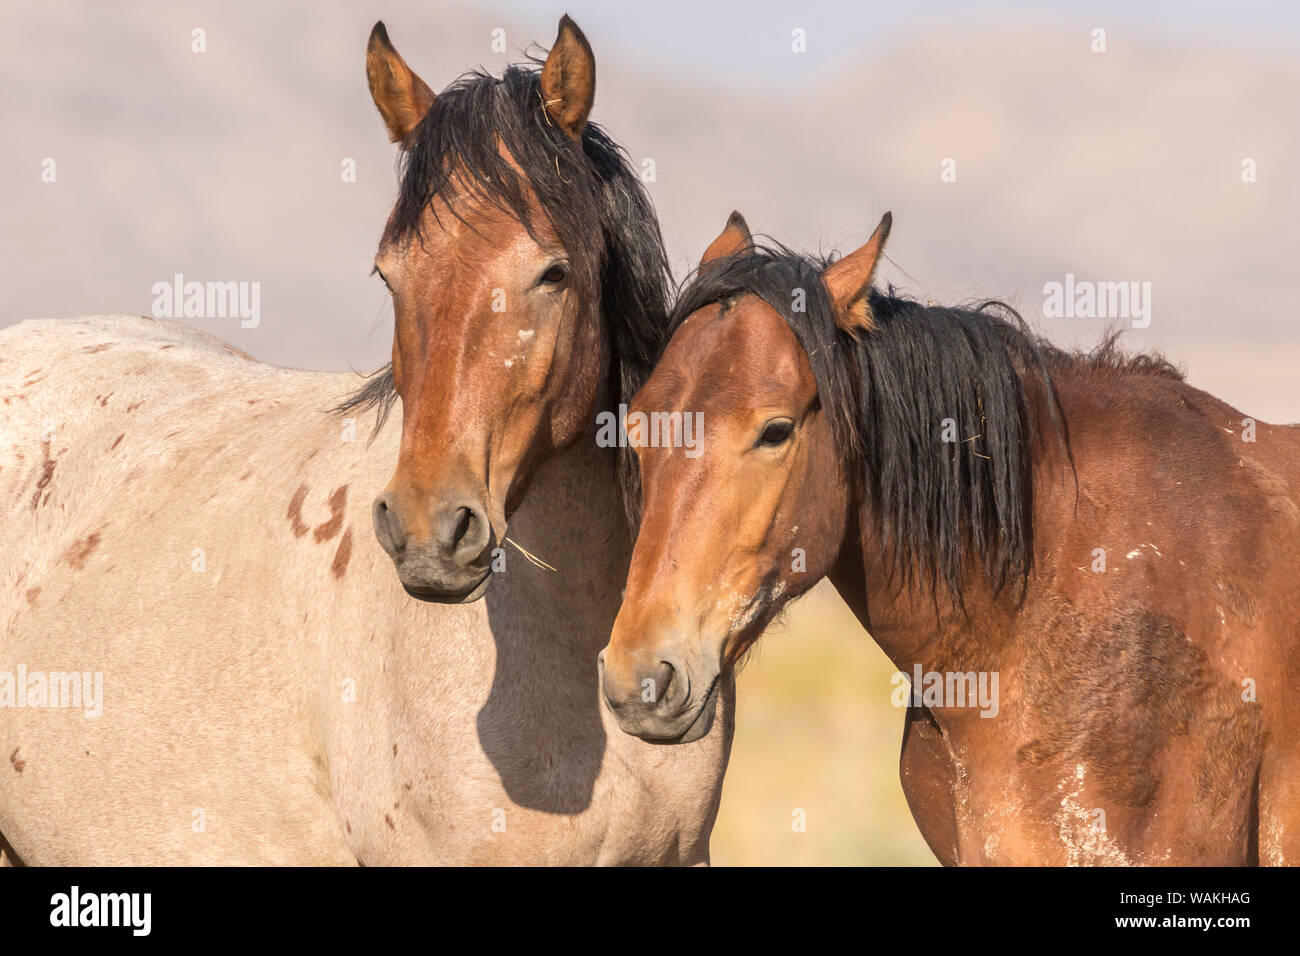 USA, Utah, Tooele County. Wild horses close-up. Credit as: Cathy and Gordon Illg / Jaynes Gallery / DanitaDelimont.com Stock Photo